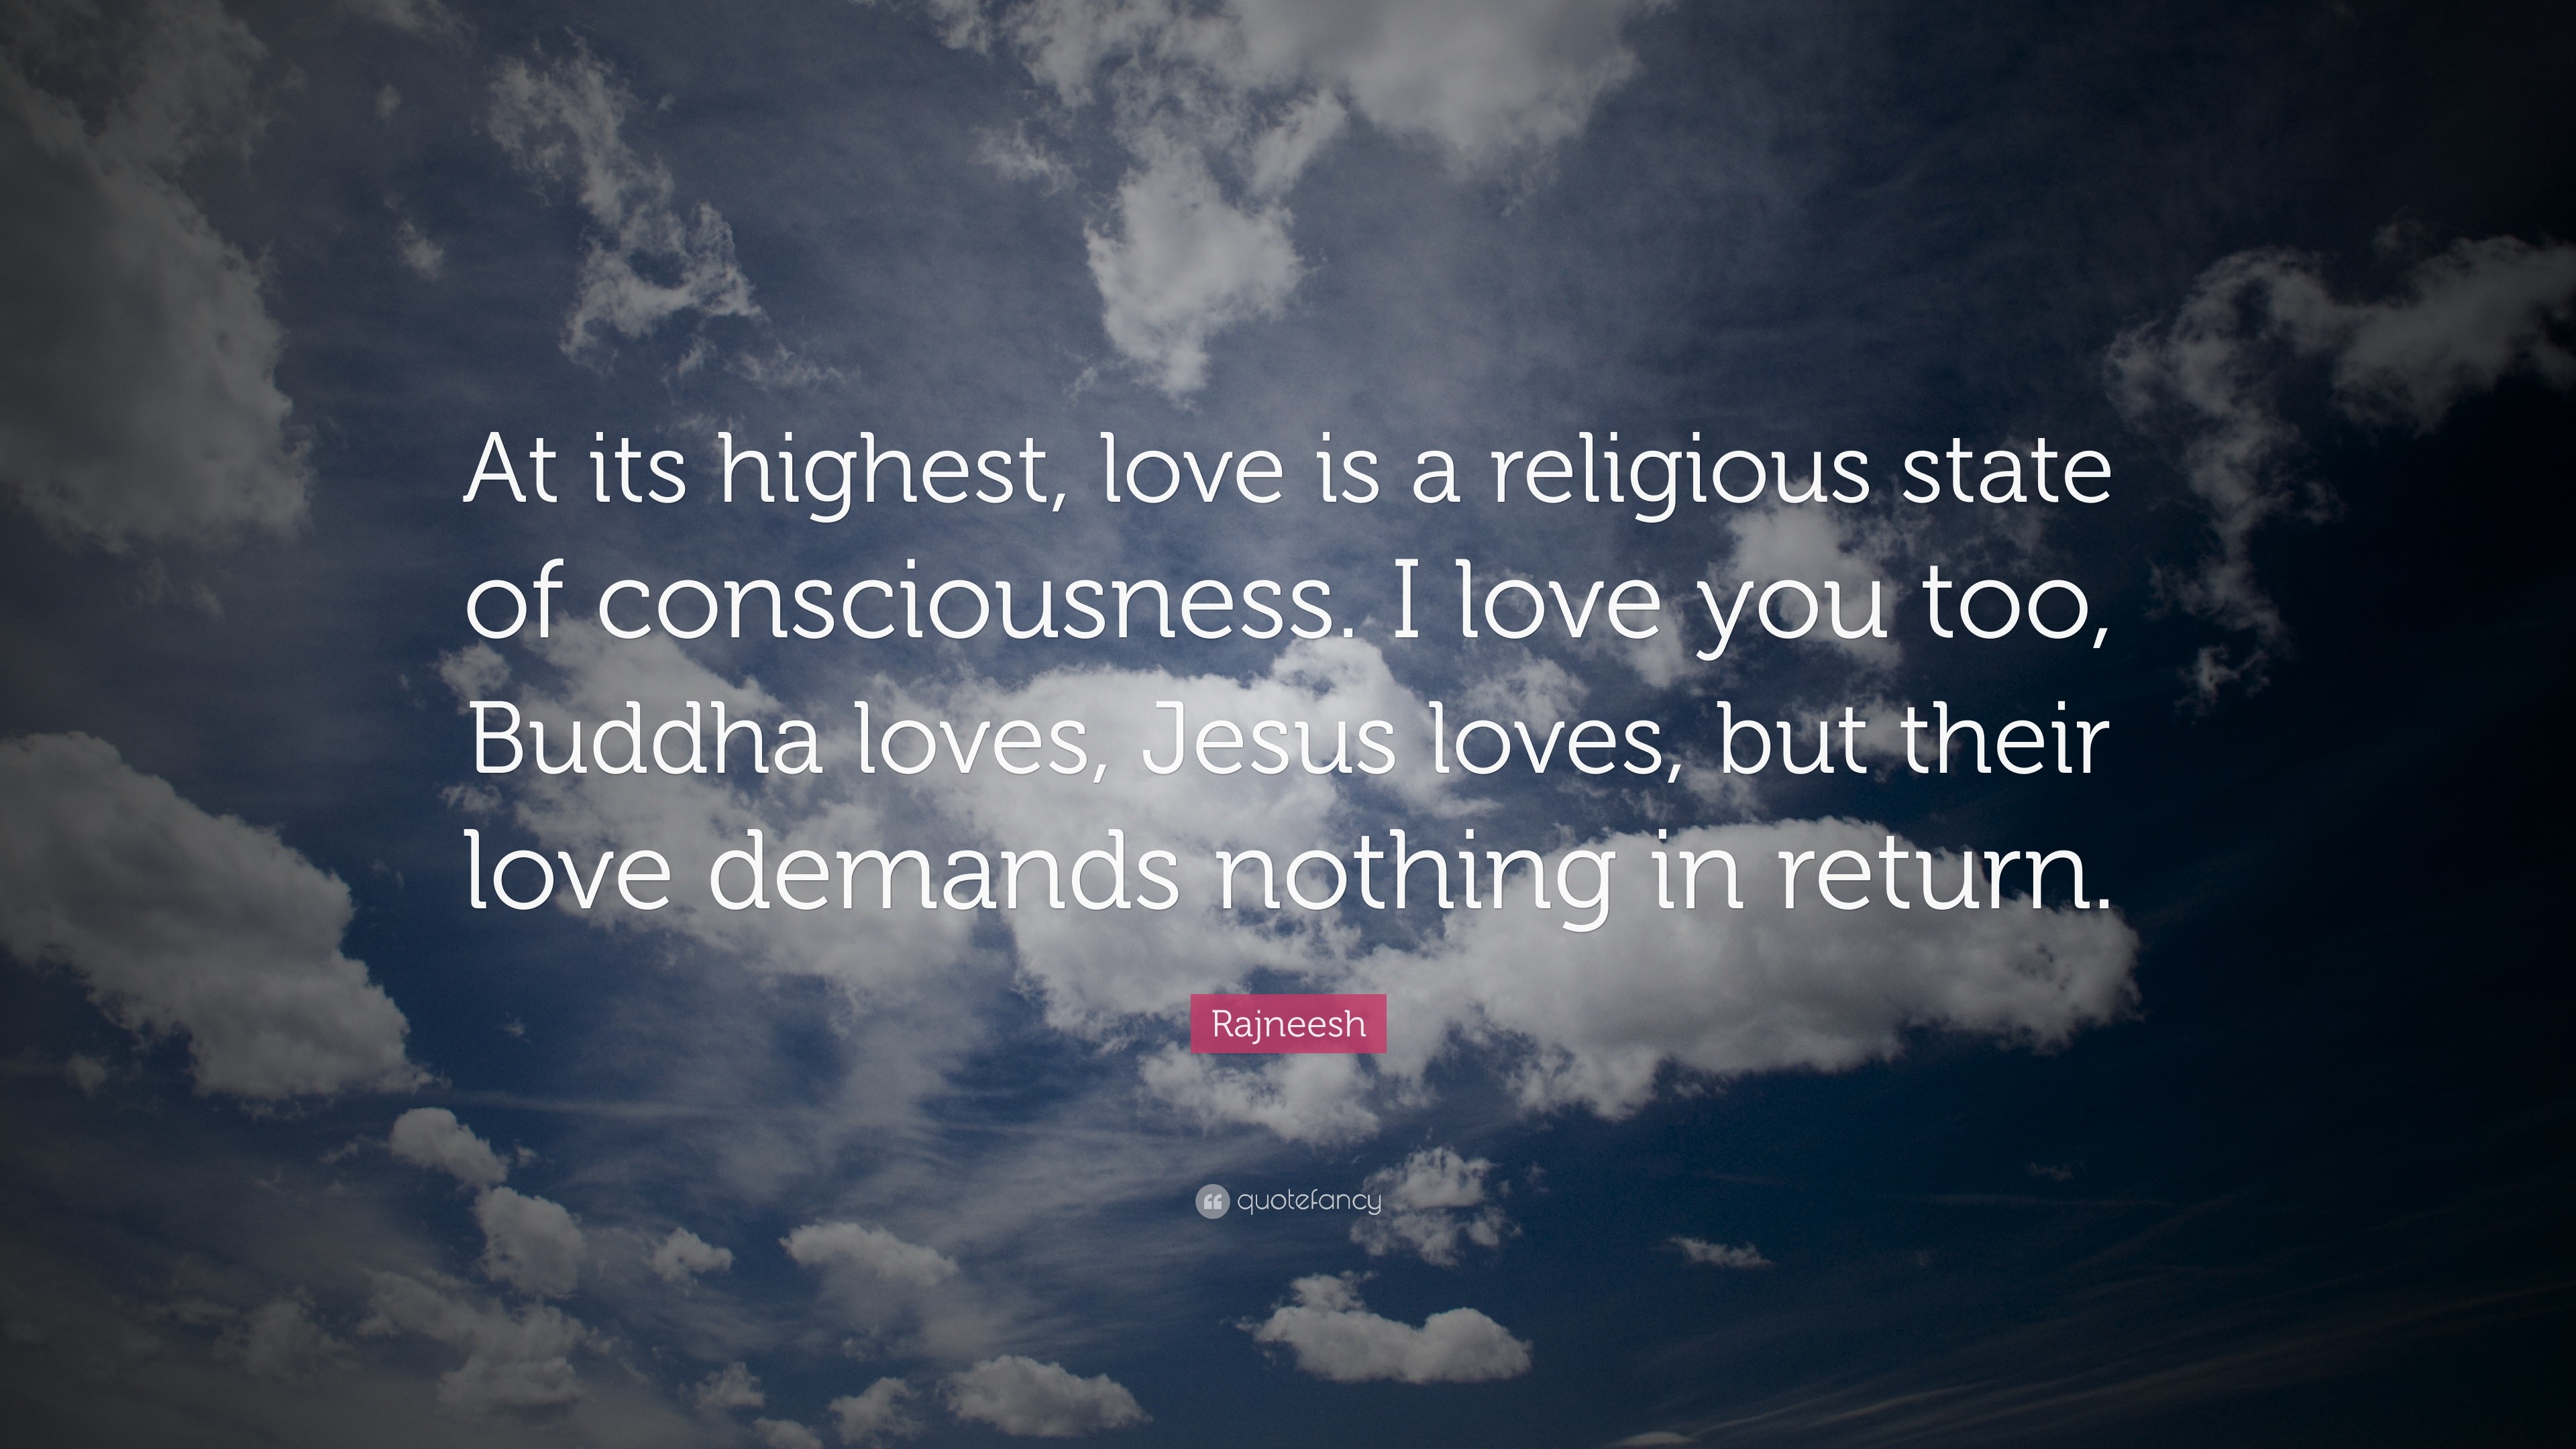 Rajneesh Quote “At its highest love is a religious state of consciousness